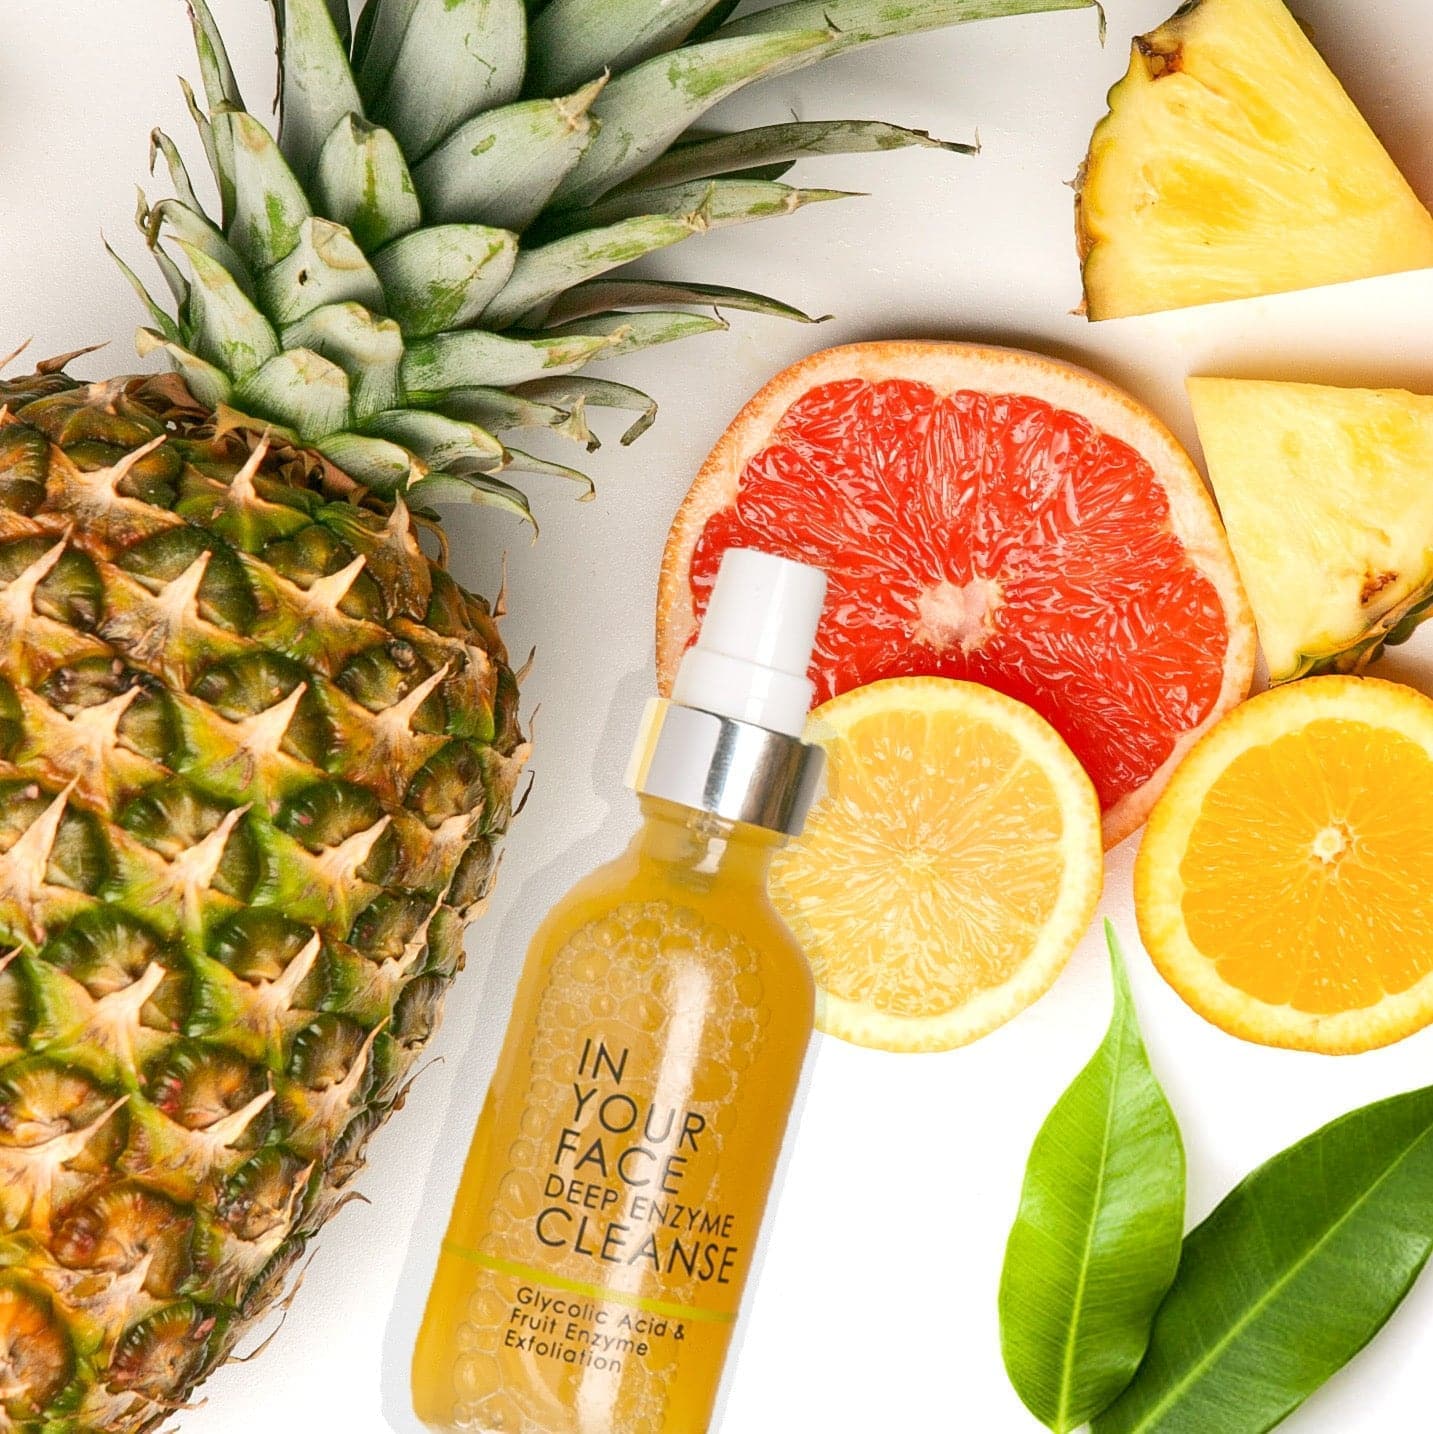 a bottle of the DEEP ENZYME CLEANSE on a flatlay among a pineapple and citrus.